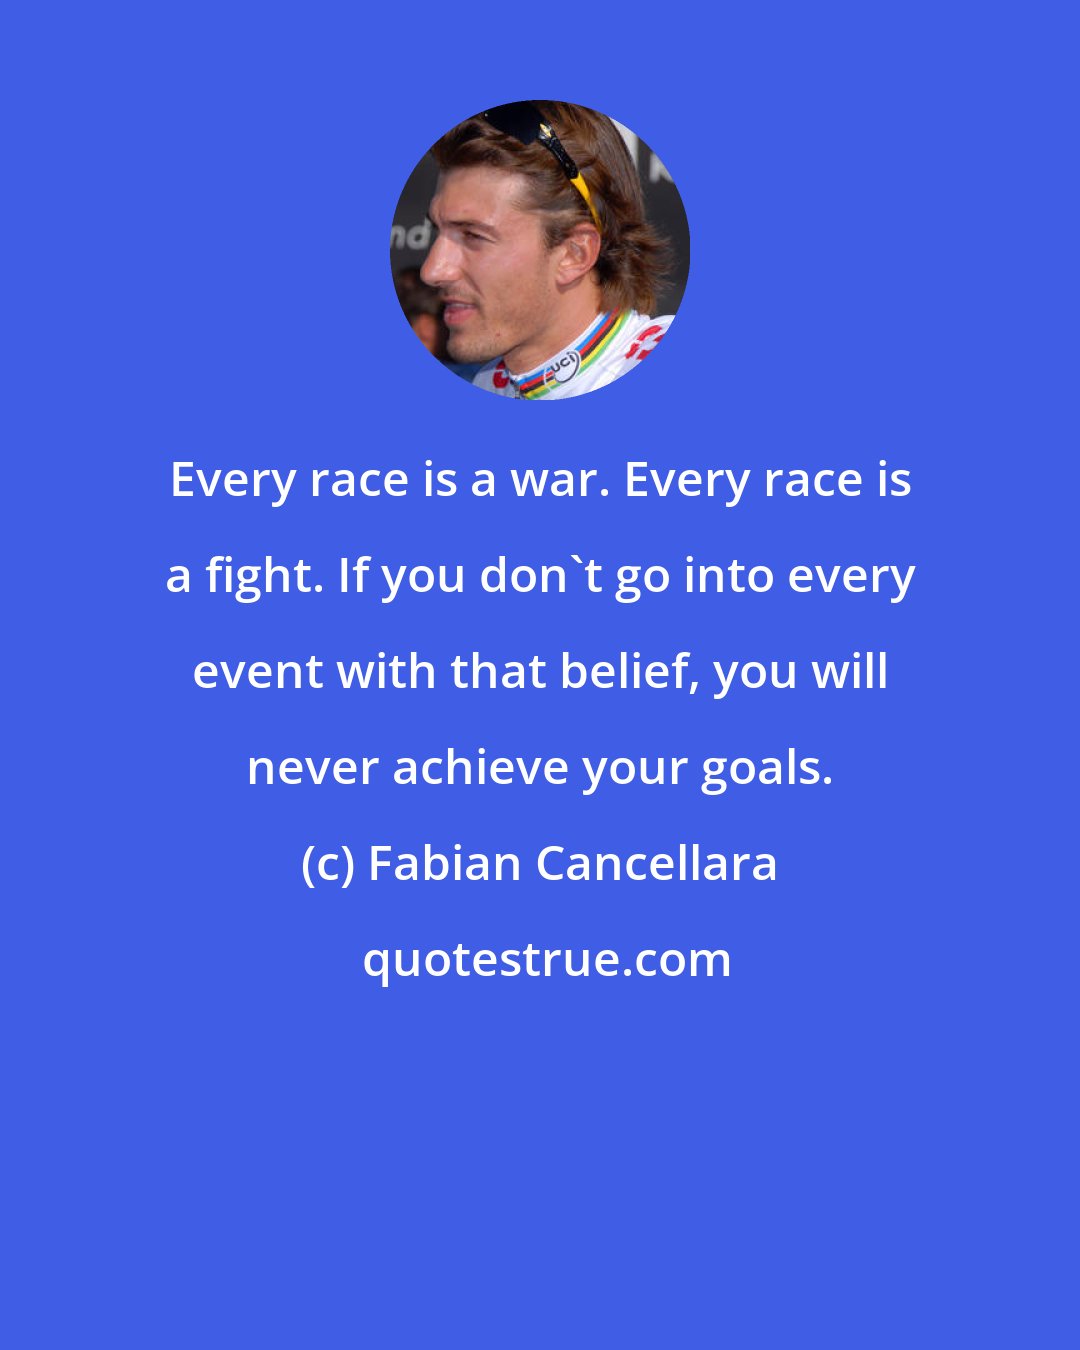 Fabian Cancellara: Every race is a war. Every race is a fight. If you don't go into every event with that belief, you will never achieve your goals.